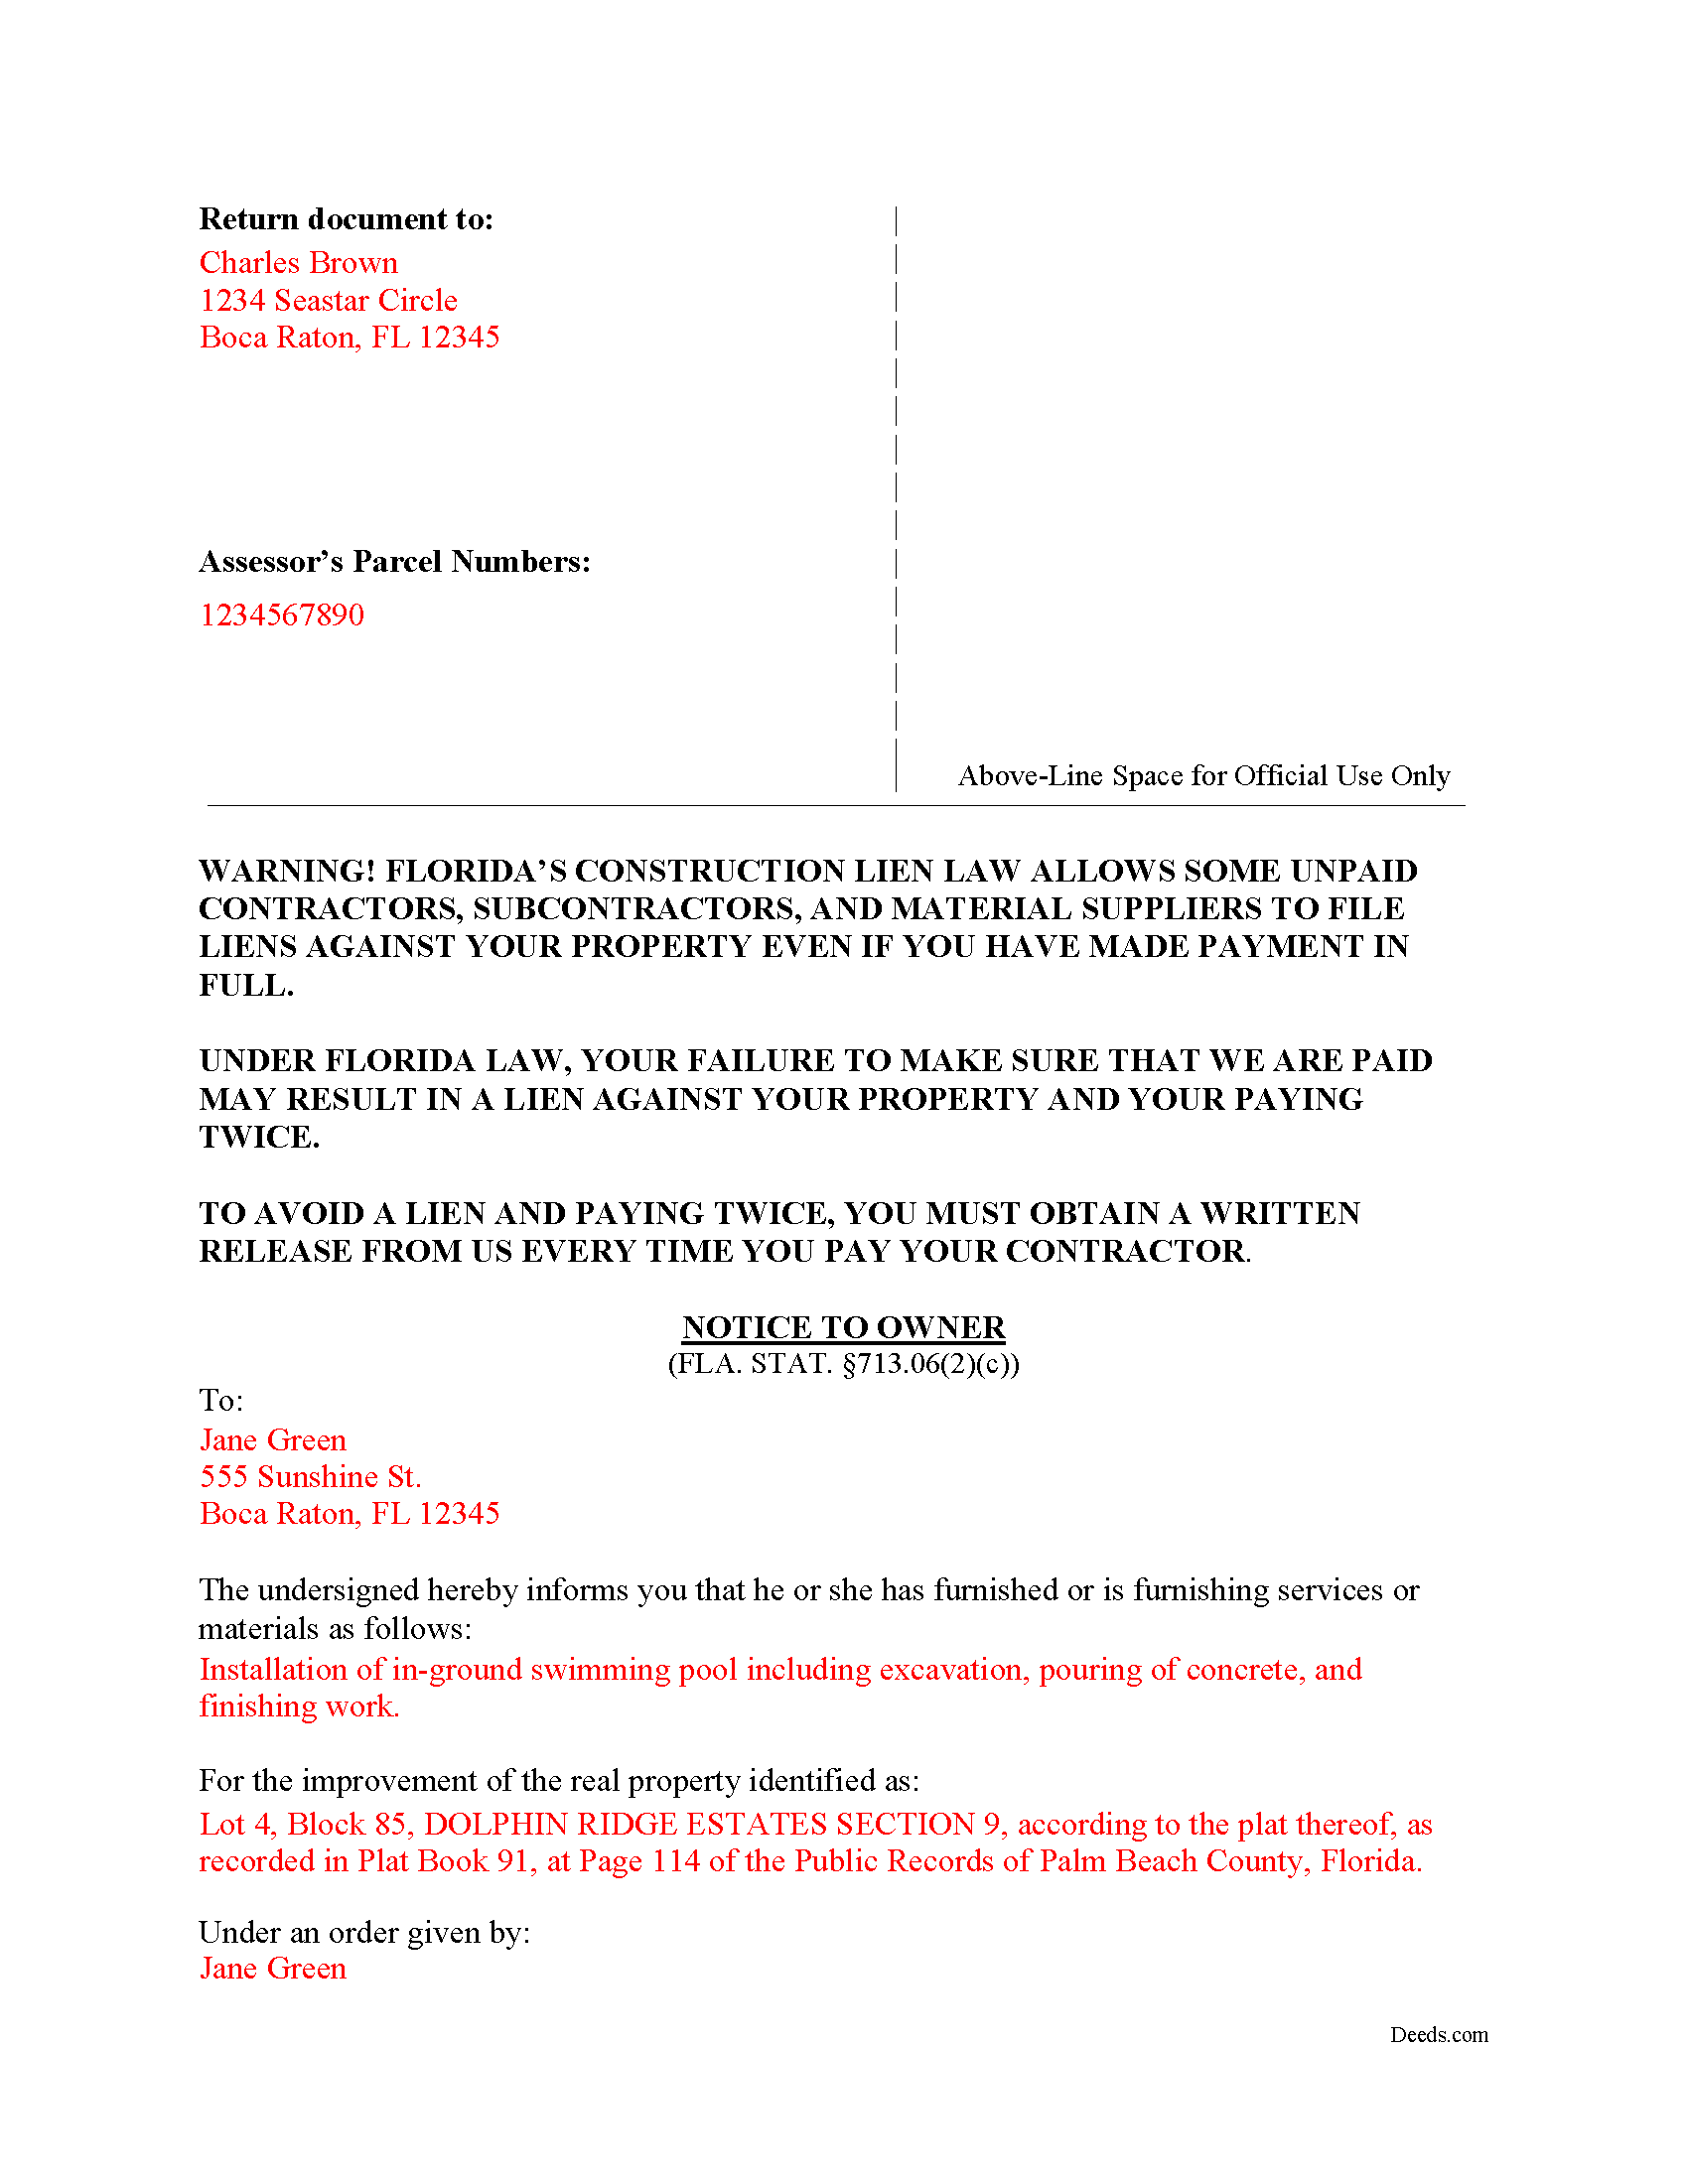 Completed Example of the Notice to Owner Document